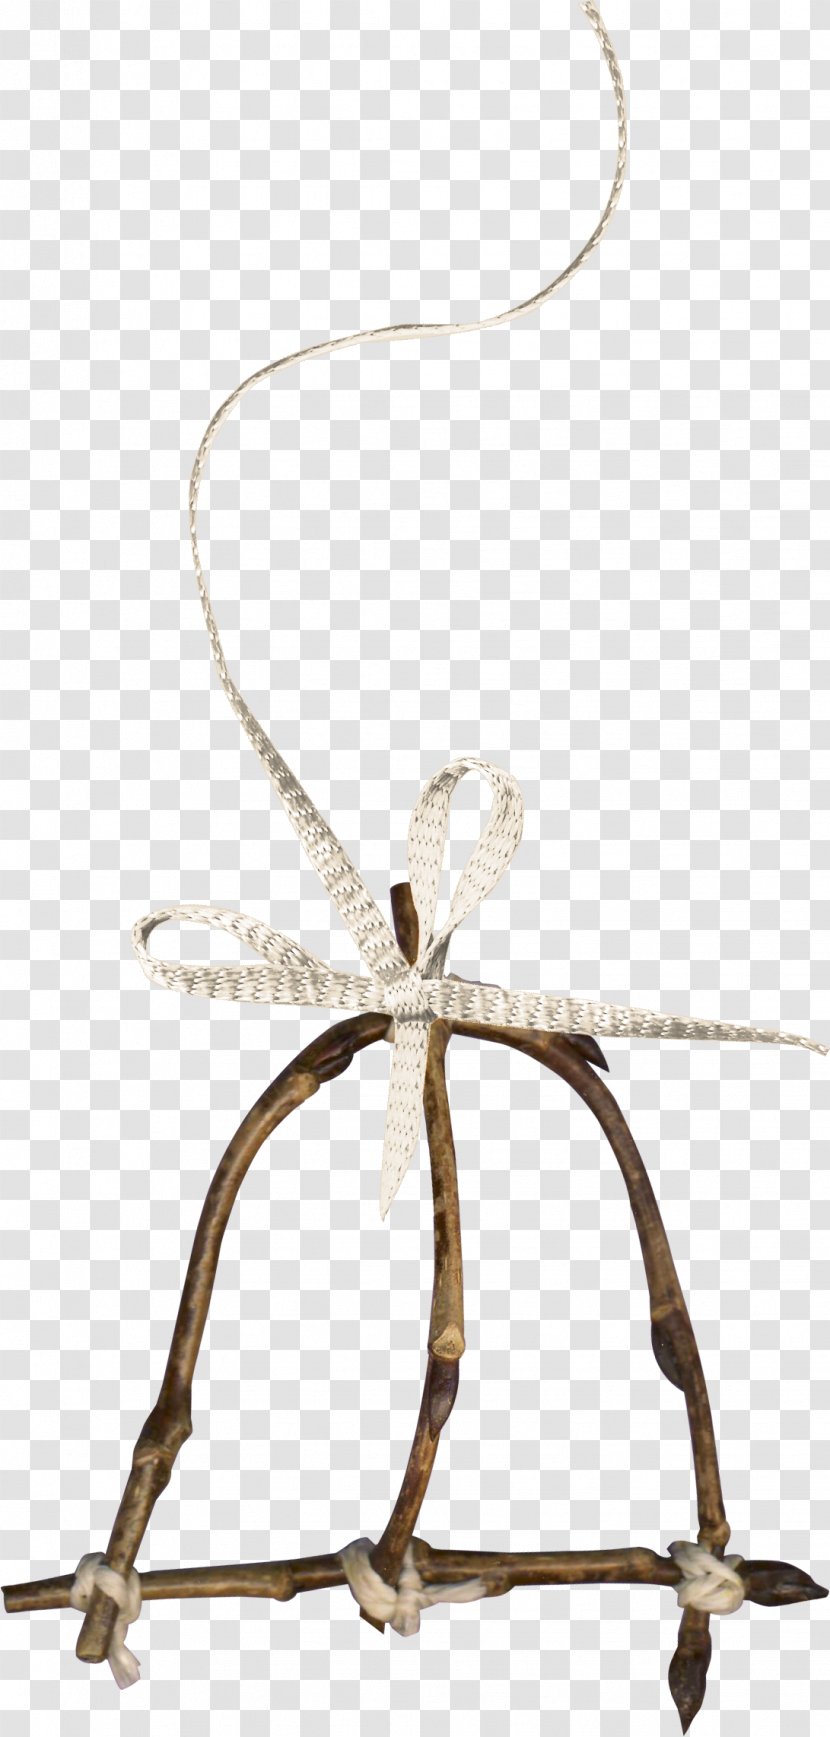 Twig Rope Branch Download - Material - Brown Litter Frame Transparent PNG